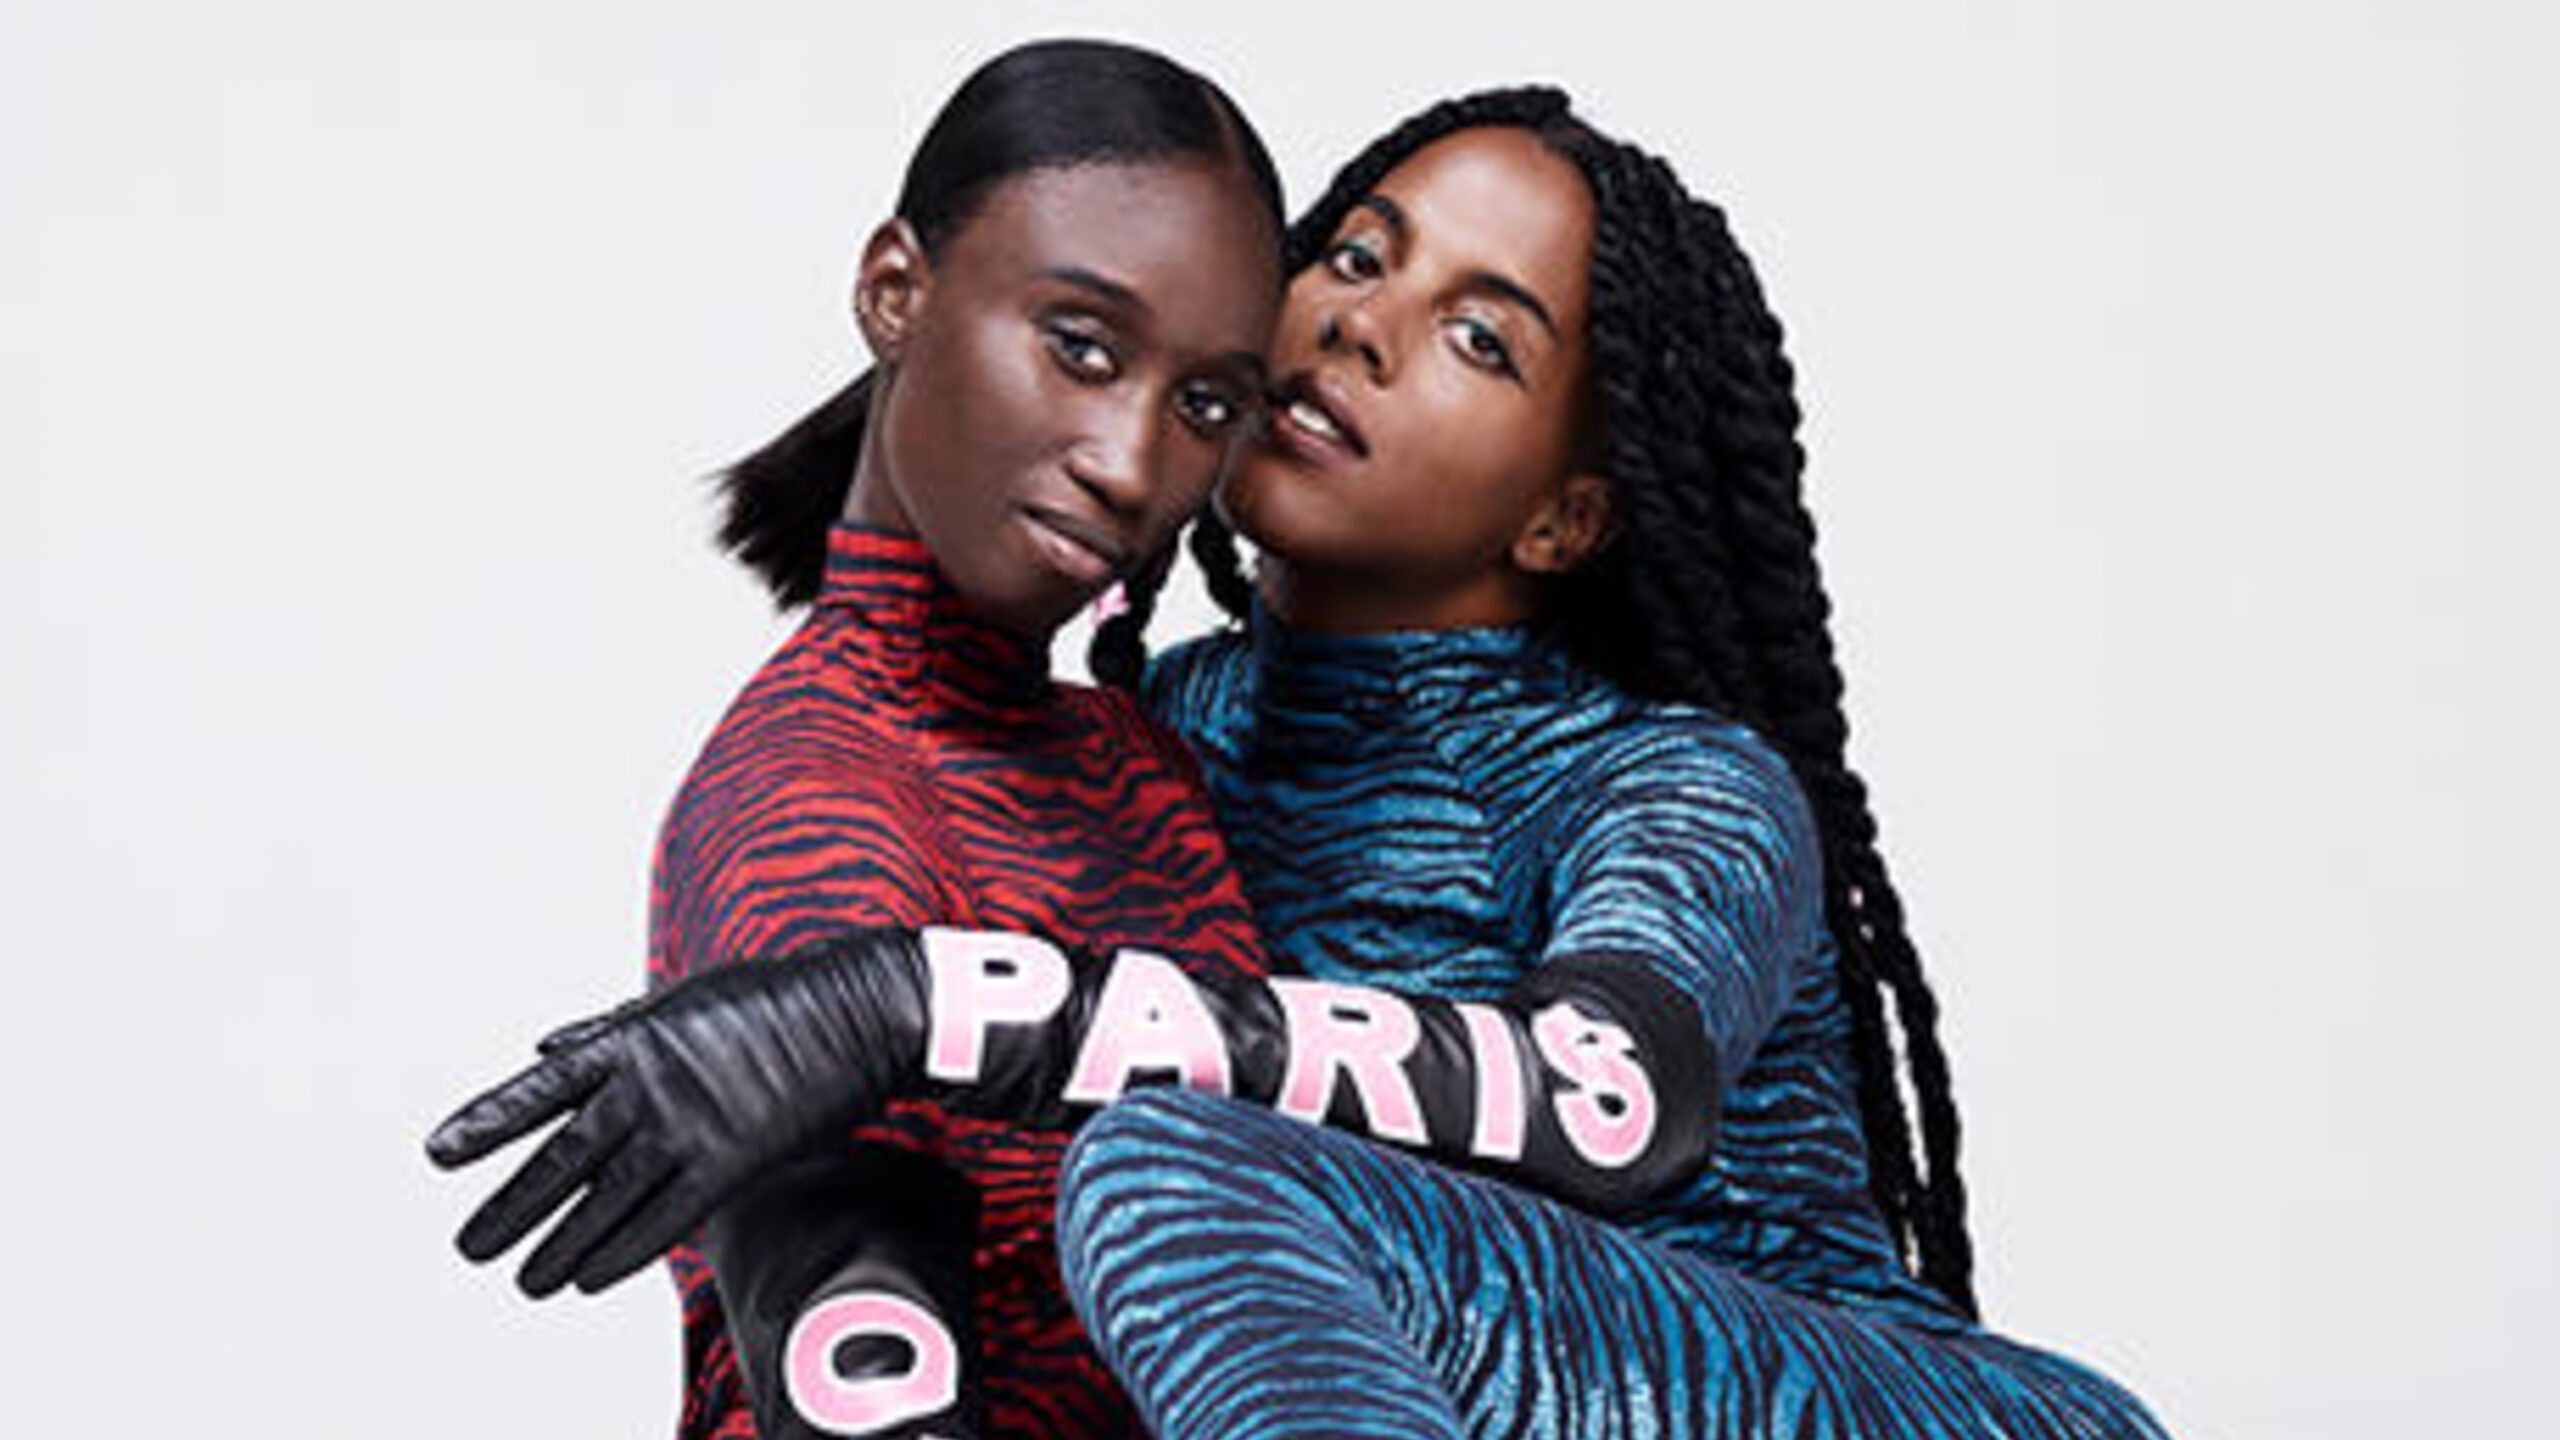 SNEAK PEEK: First look at the Kenzo x H&M collection